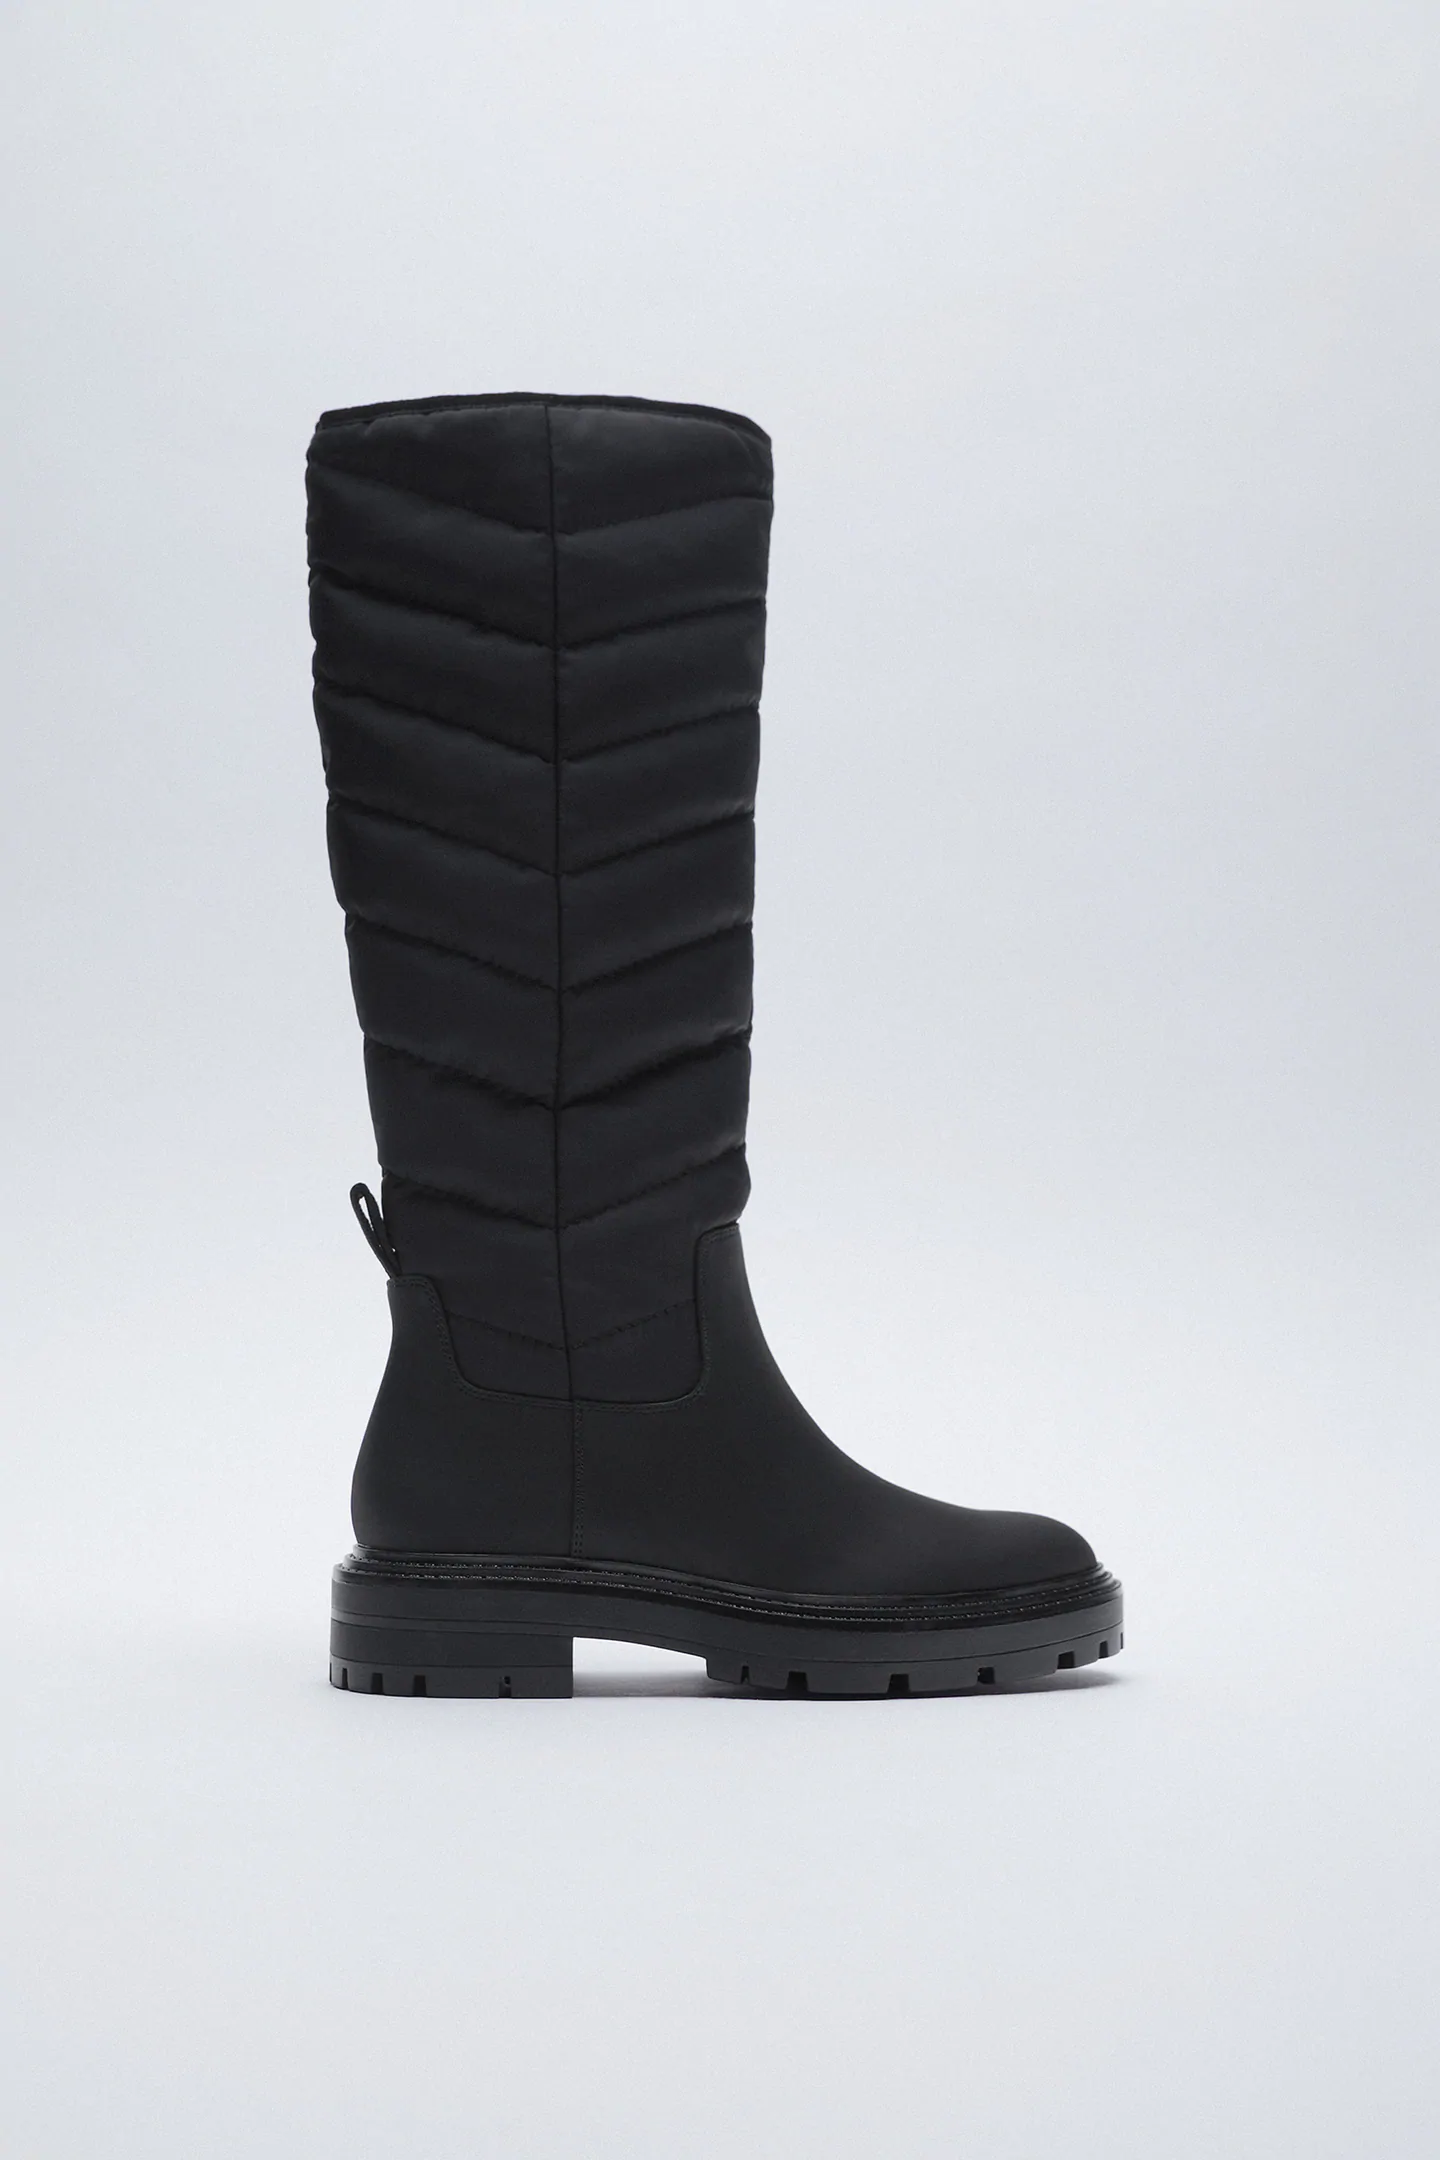 14 Waterproof Winter Boots That Are As Chic As They Are Functional - SAVAÅ